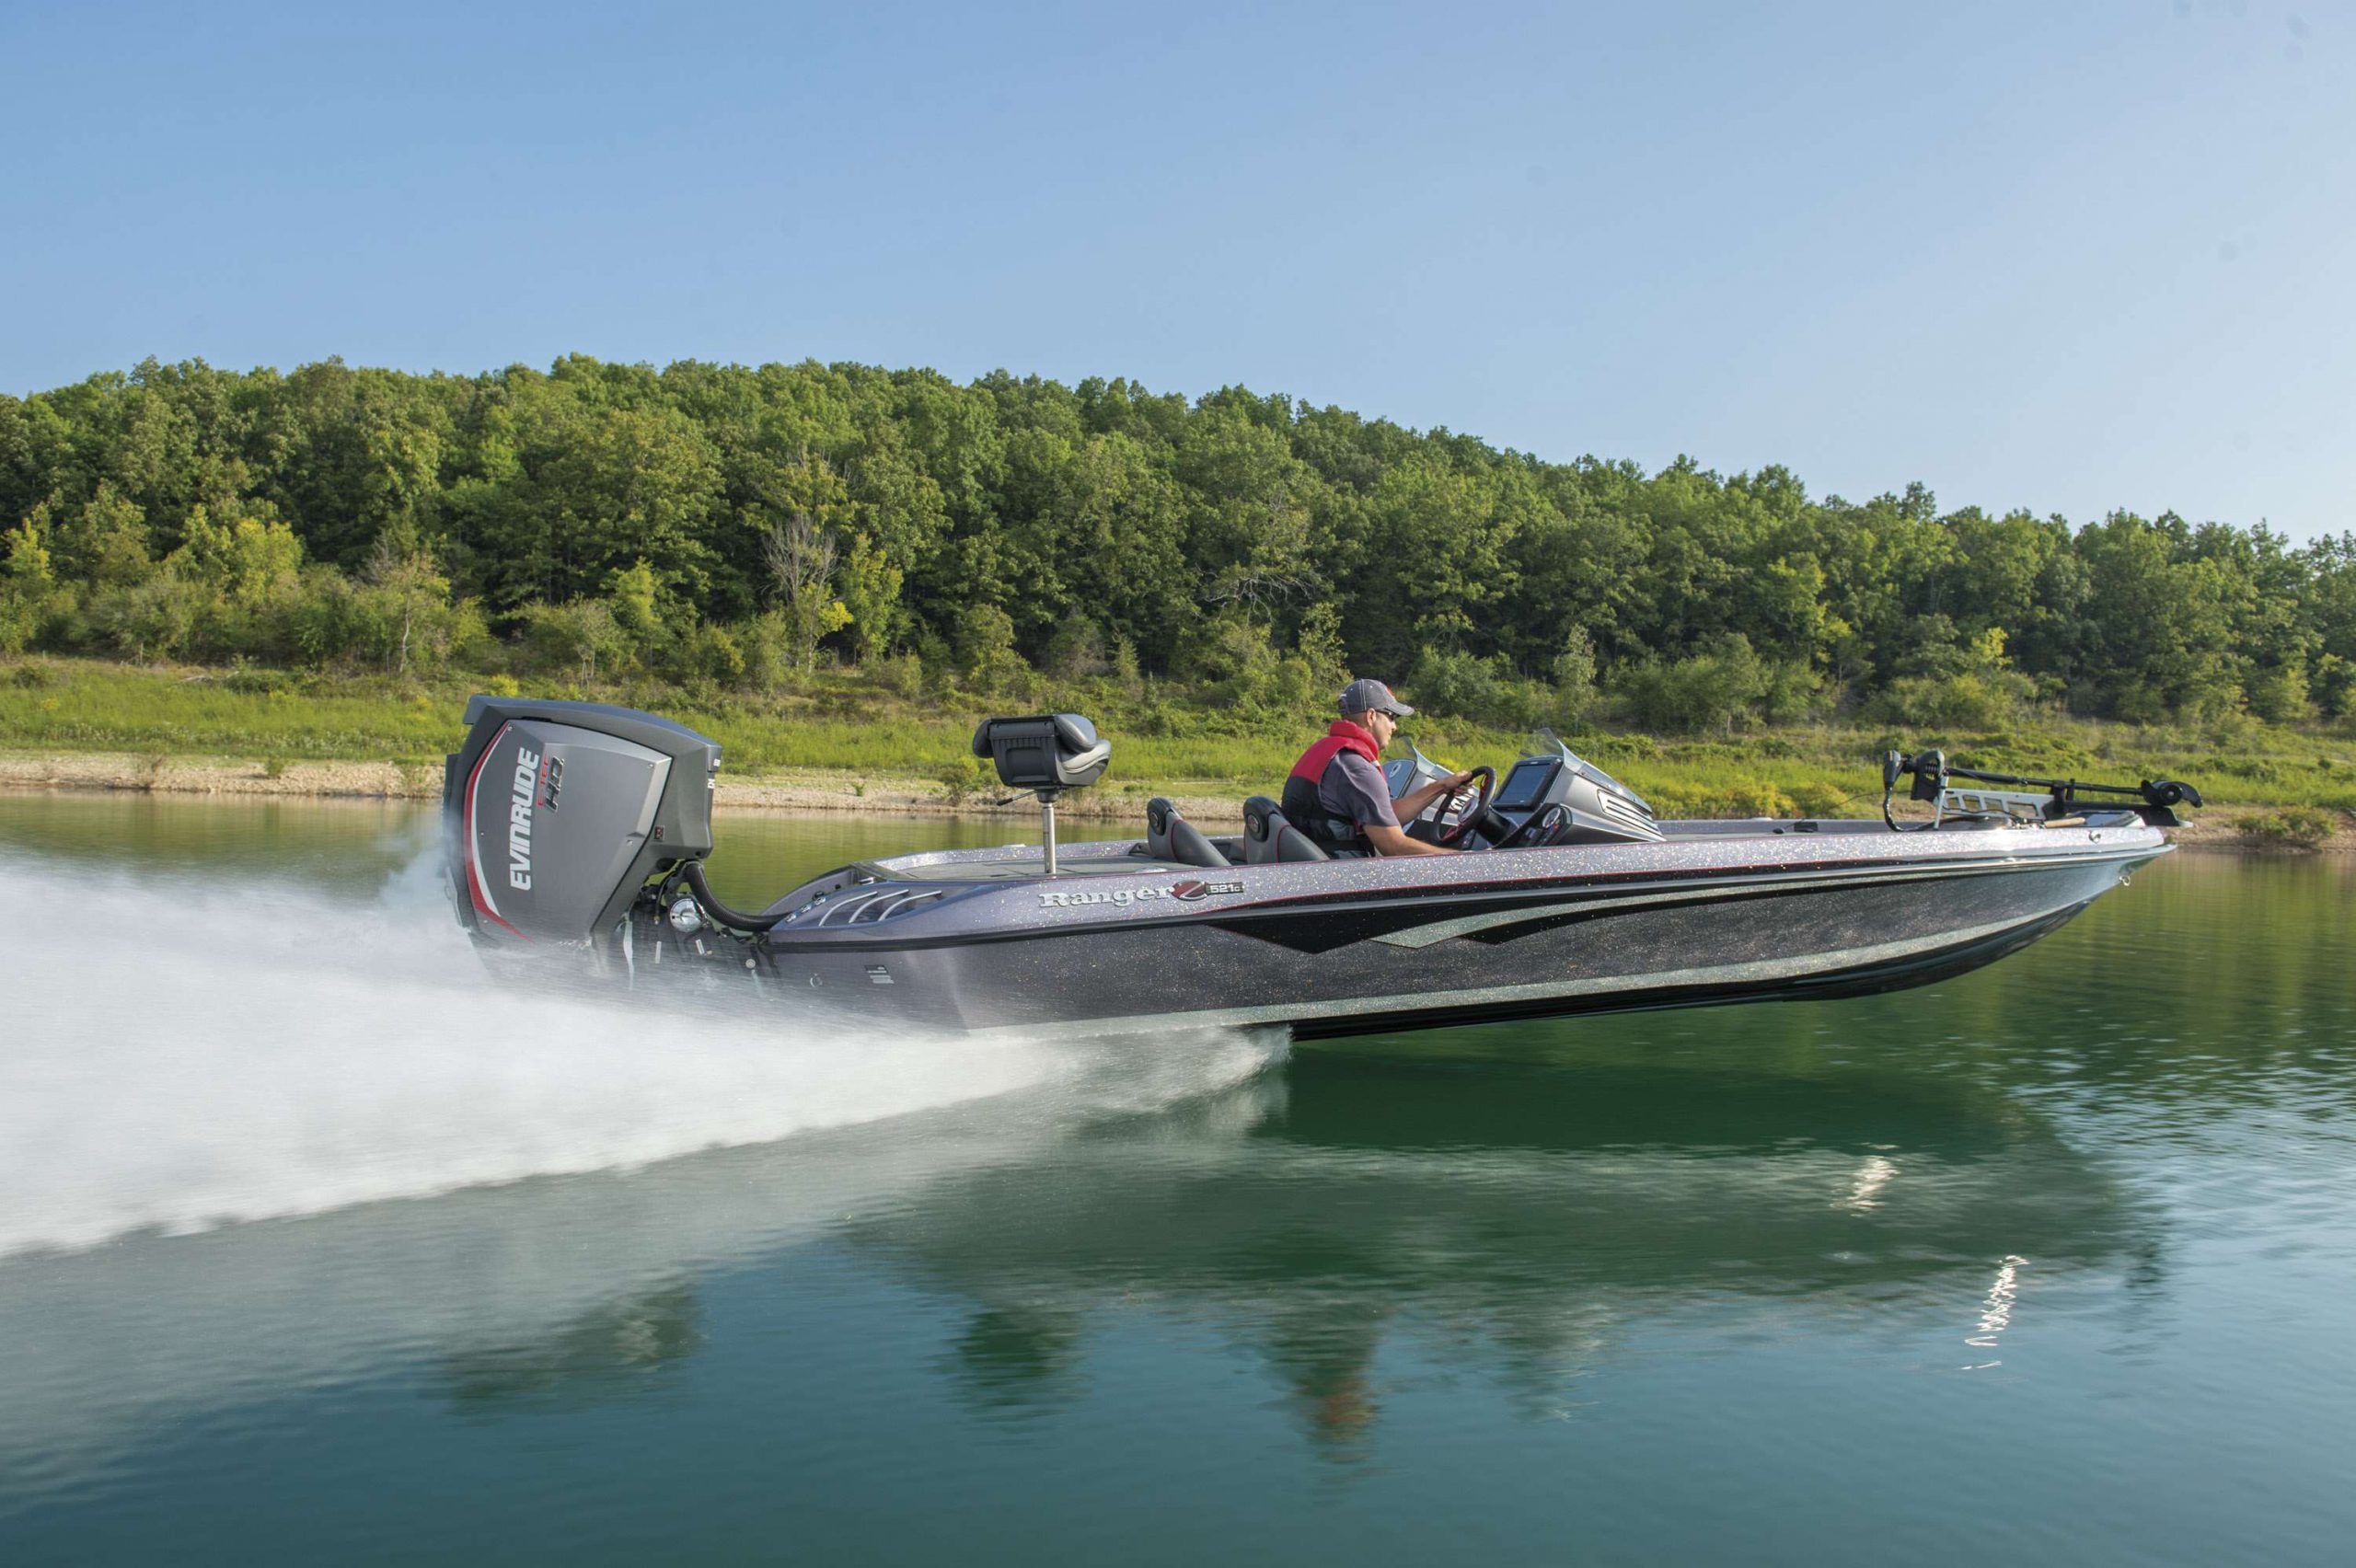 <B>RANGER BOATS HERO PACKAGE </b>
This boat company has created an exclusive package to highlight the new Evinrude ETEC G2 outboard hanging off its transom. Along with the engine, anglers get a custom steering wheel; black, chrome-finished 17-inch trailer wheels; custom-painted consoles and setback plate; and an innovative cockpit floor liner thatâs soft, stays cool and dries faster than carpet. The Hero package is available on Z520C, Z521C, 620FS and 621FS models. It will debut in Rangerâs Classic booth.